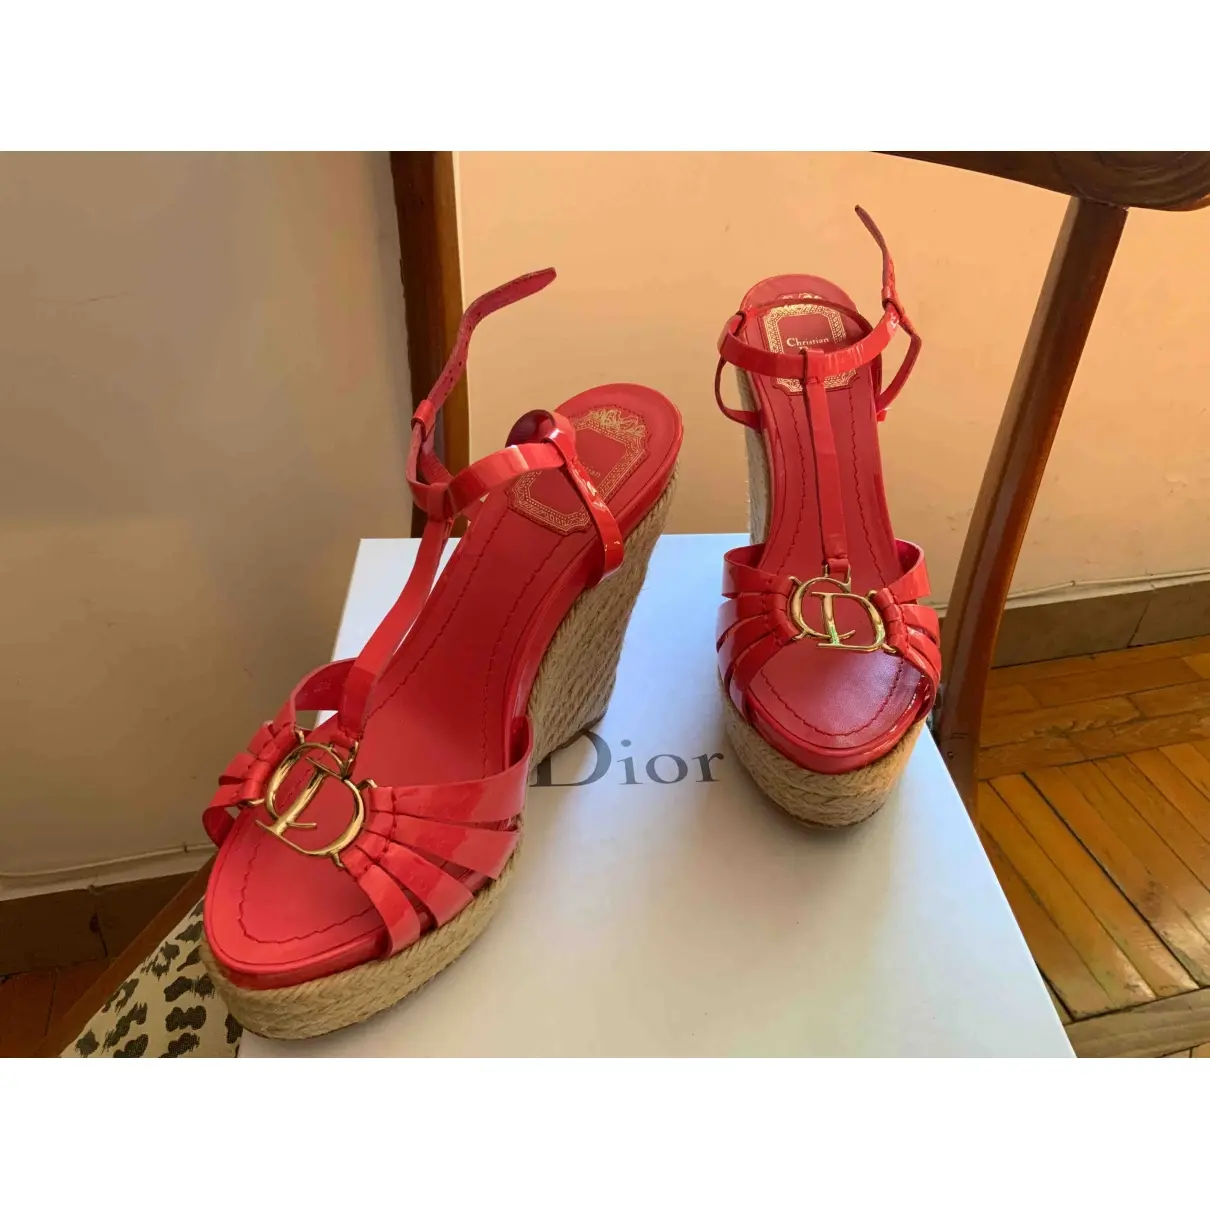 Buy Christian Dior Patent leather sandal online